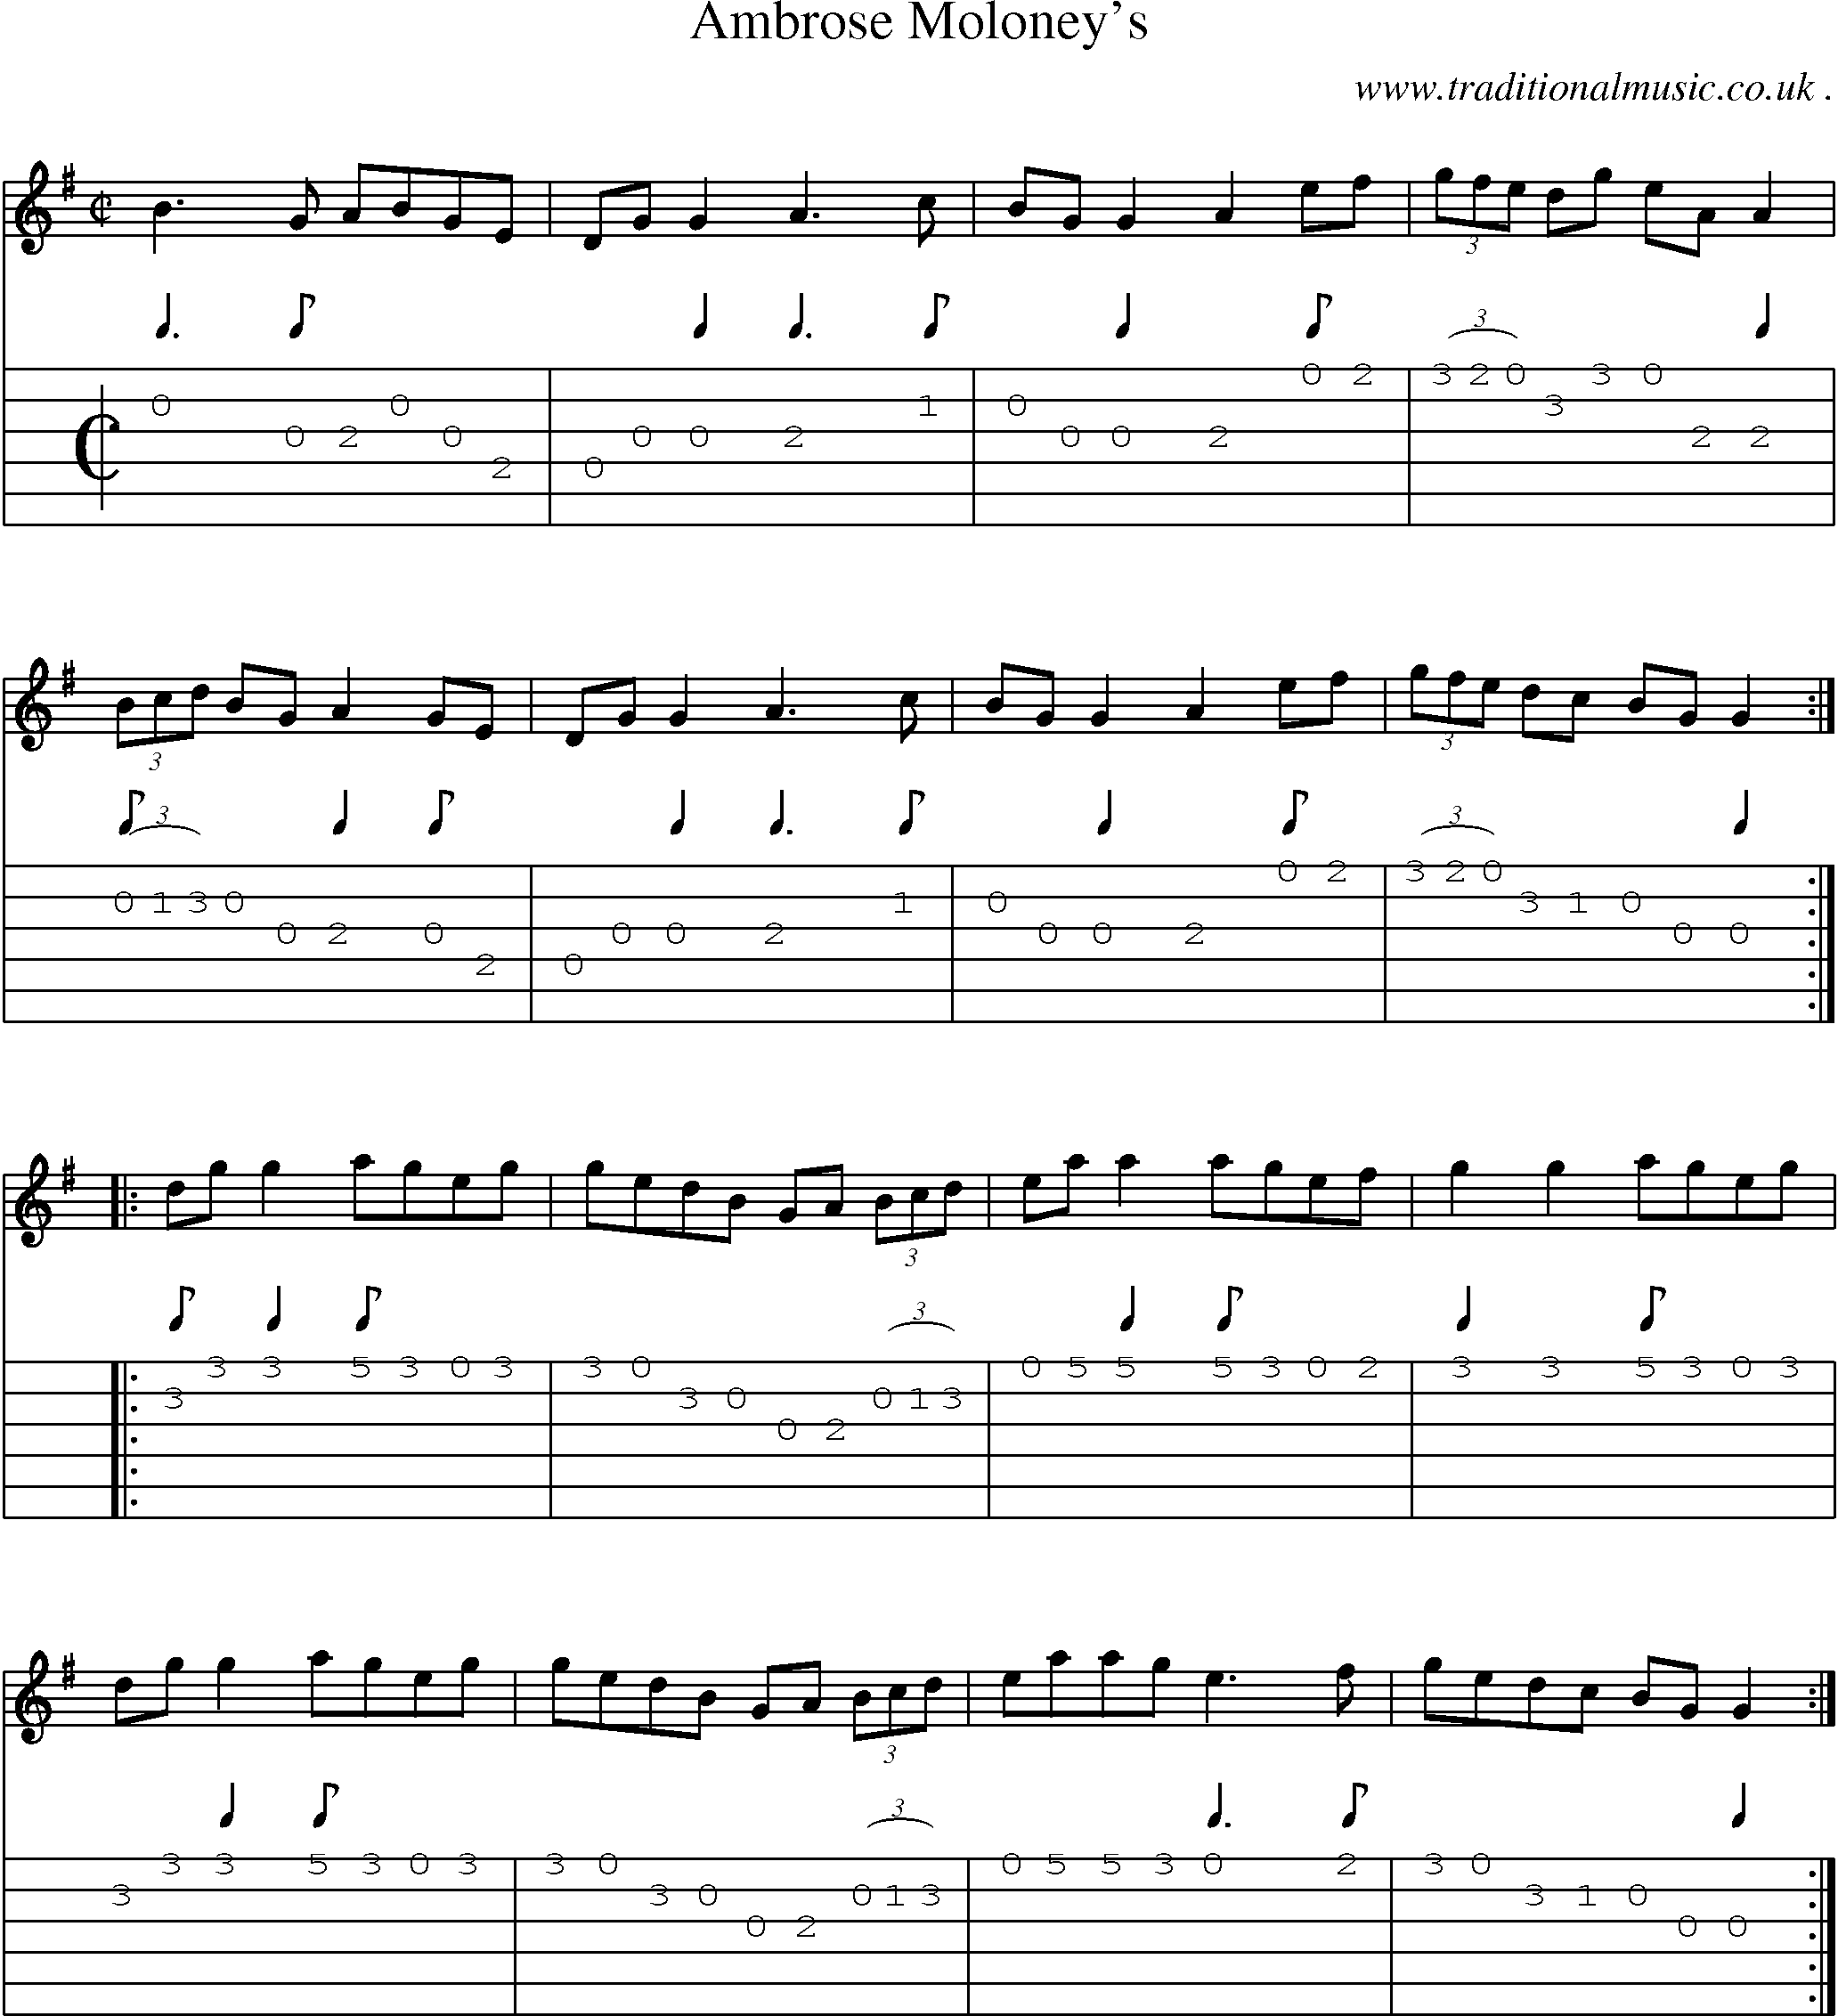 Sheet-Music and Guitar Tabs for Ambrose Moloneys